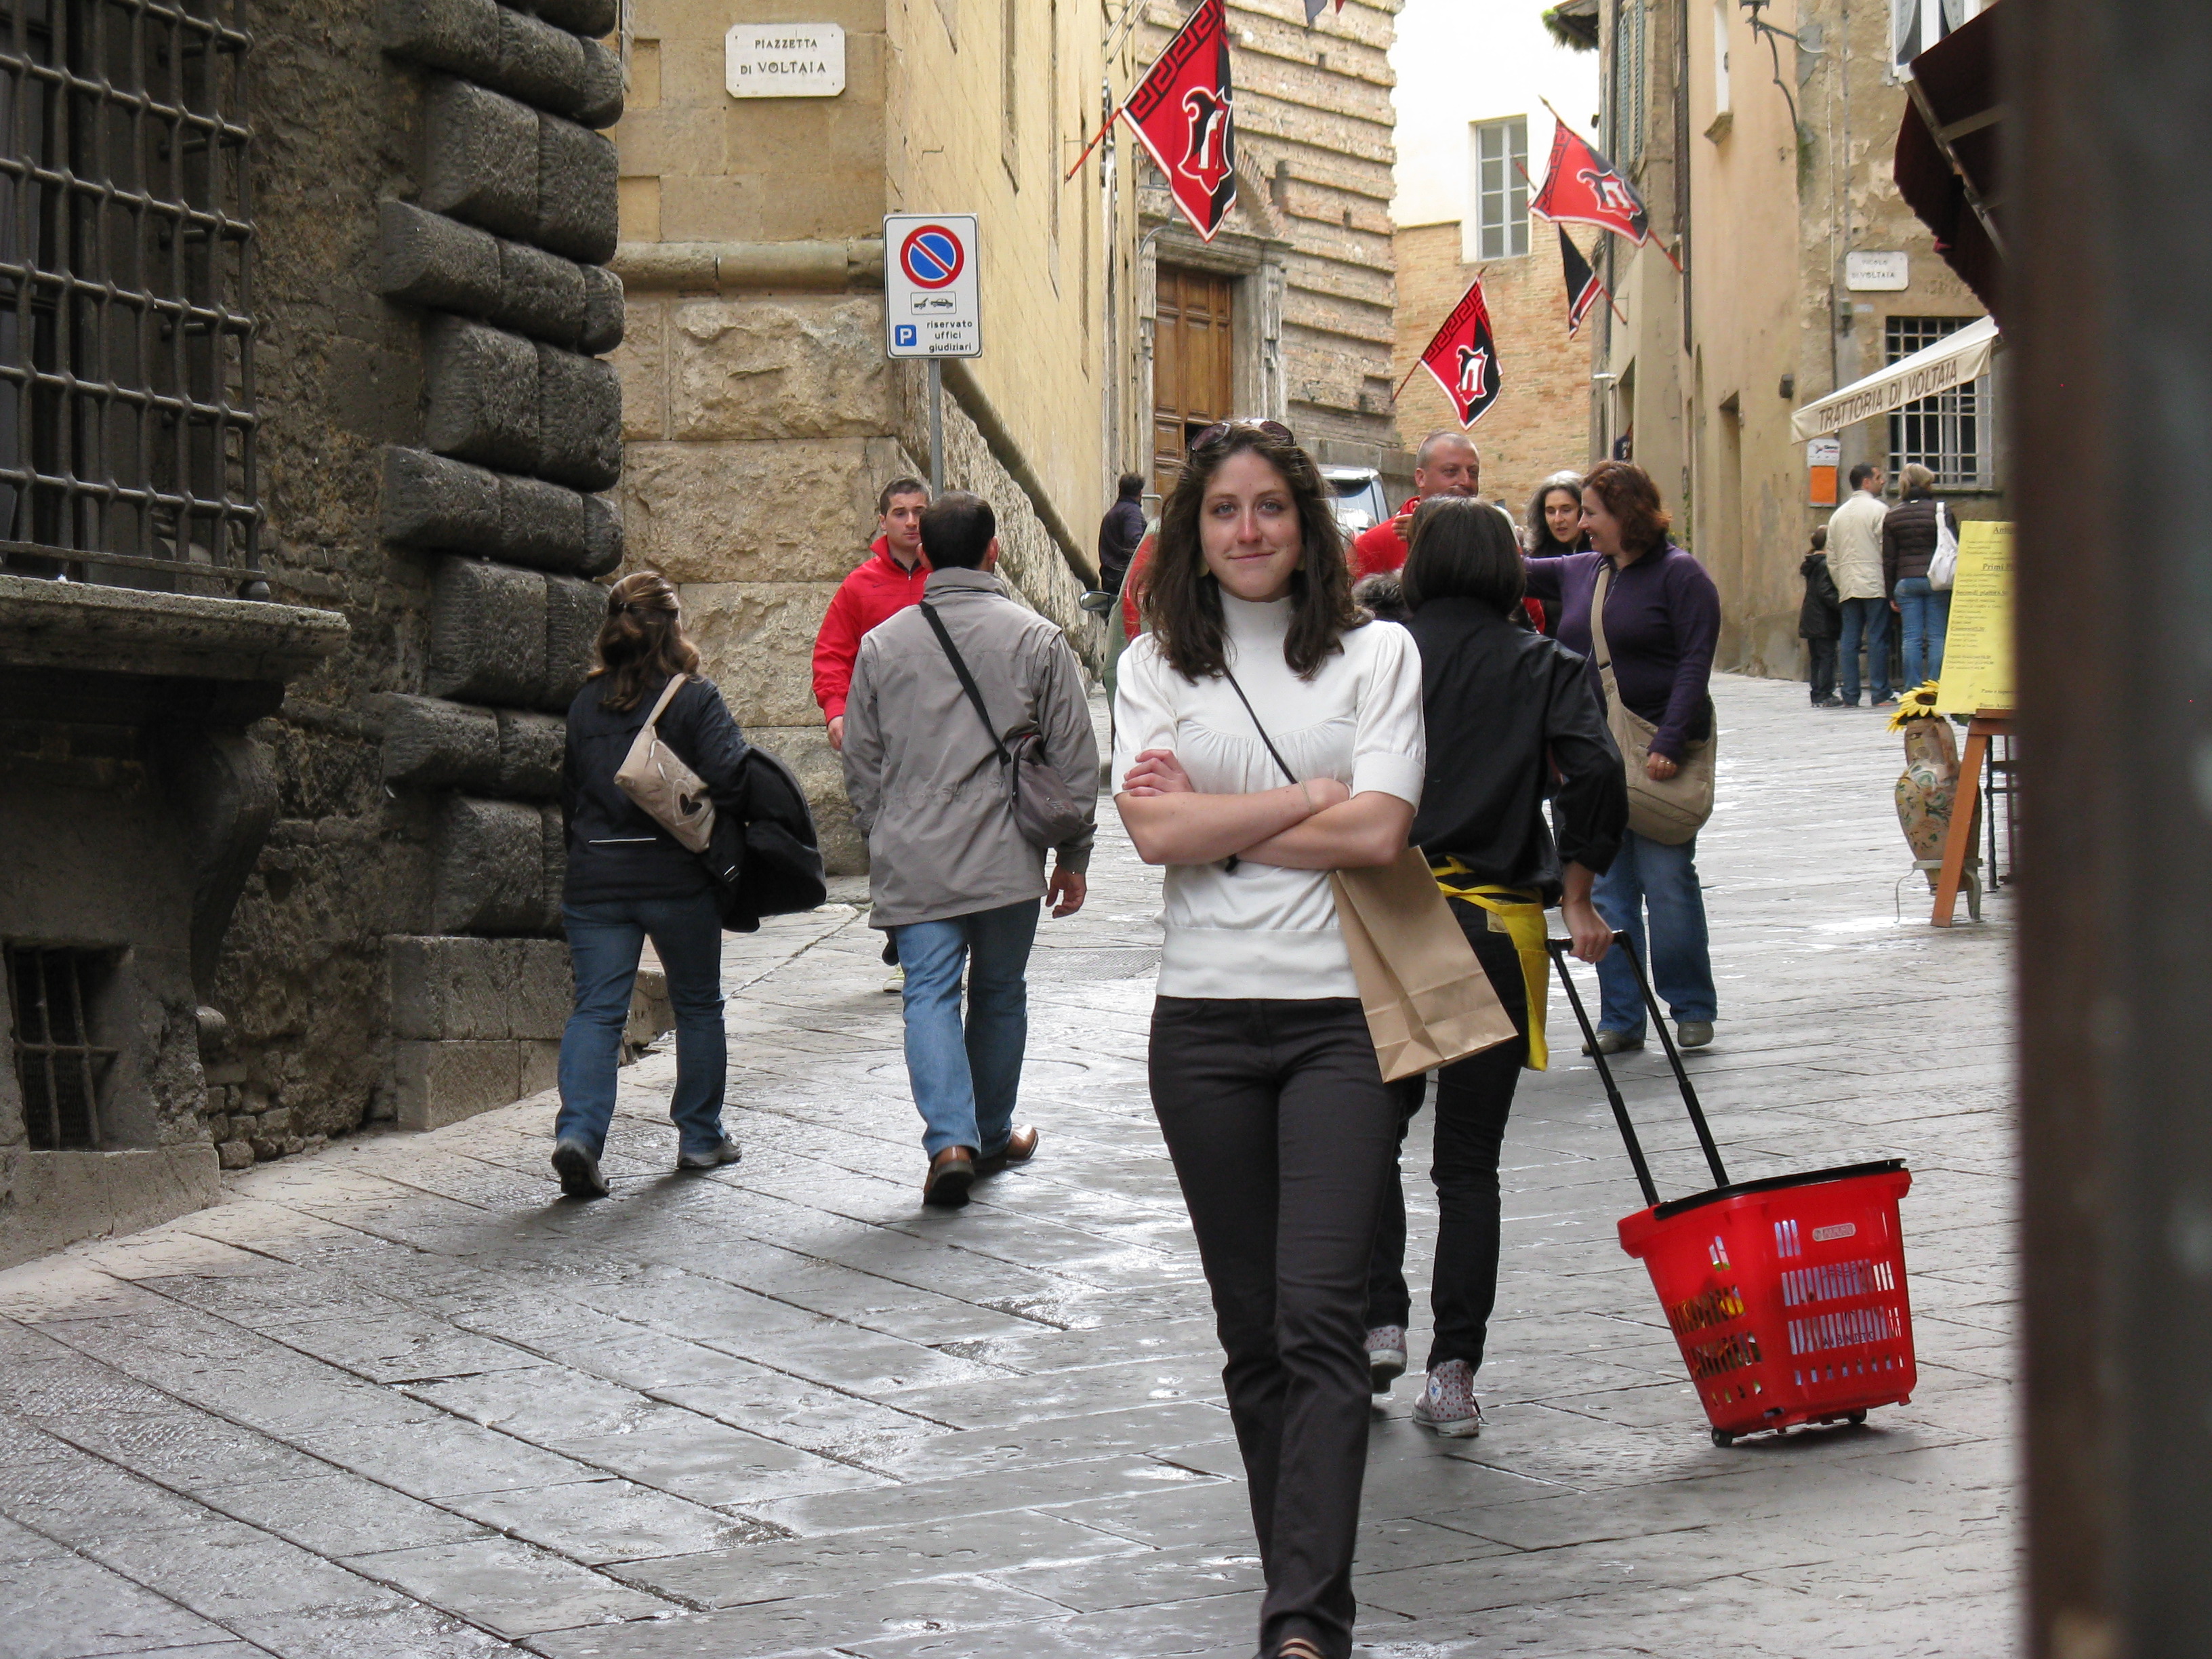 On the street in Montepulciano